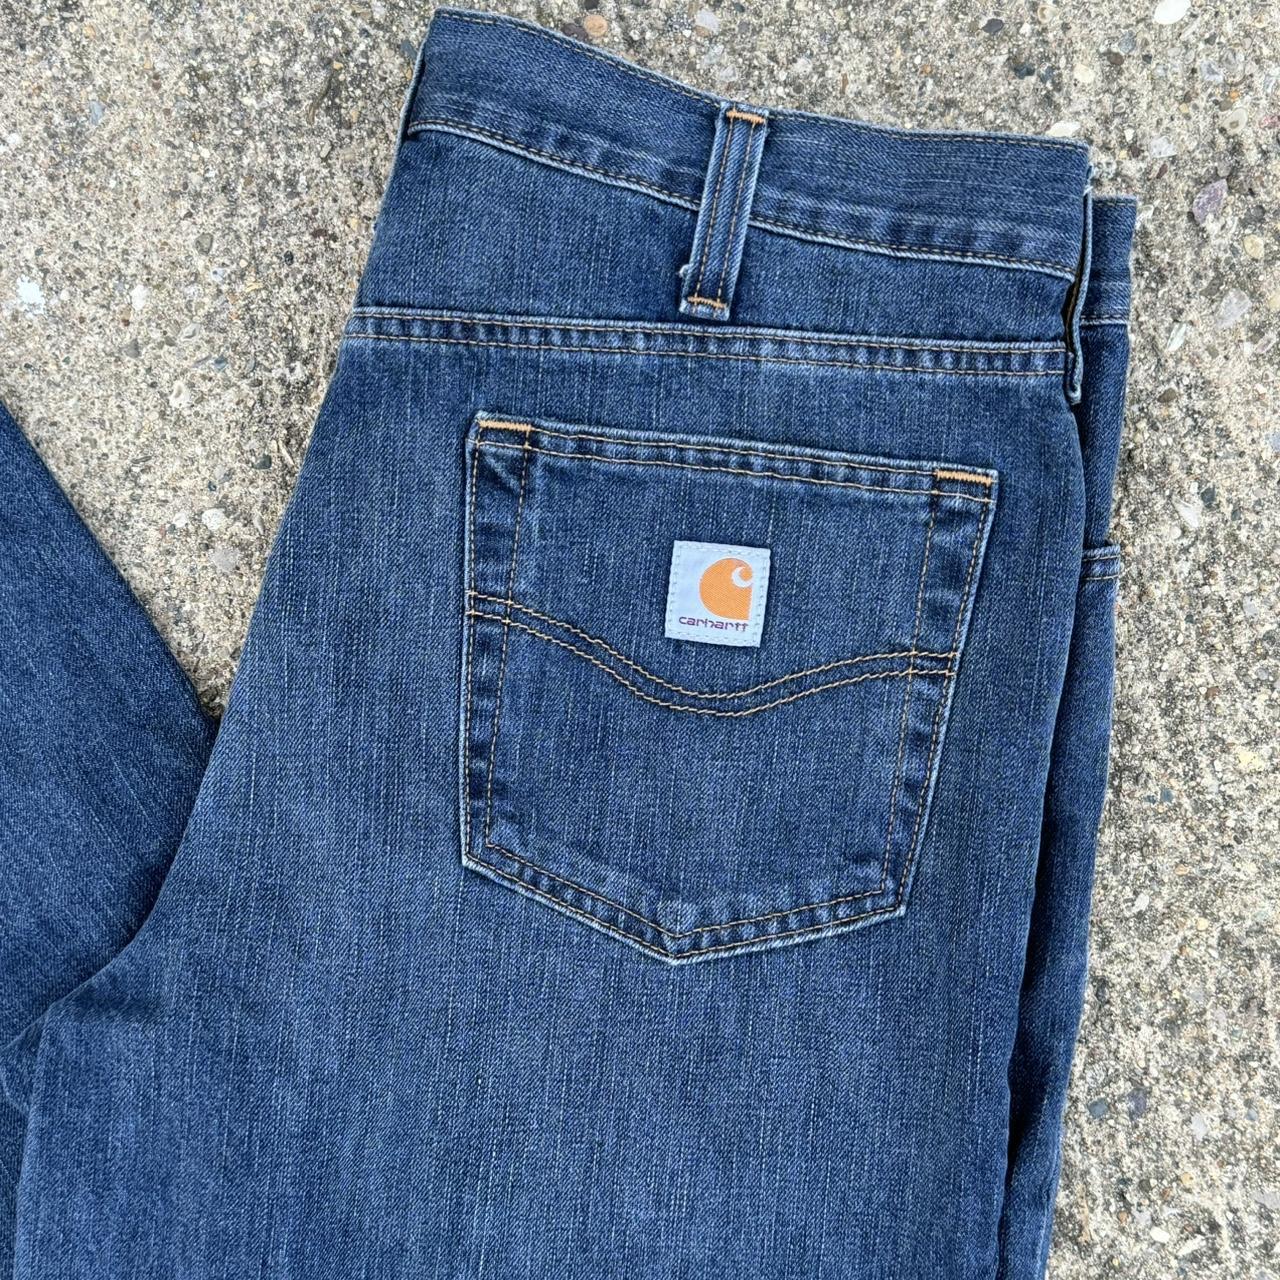 Carhartt Jeans Super dope pair of jeans! Size... - Depop